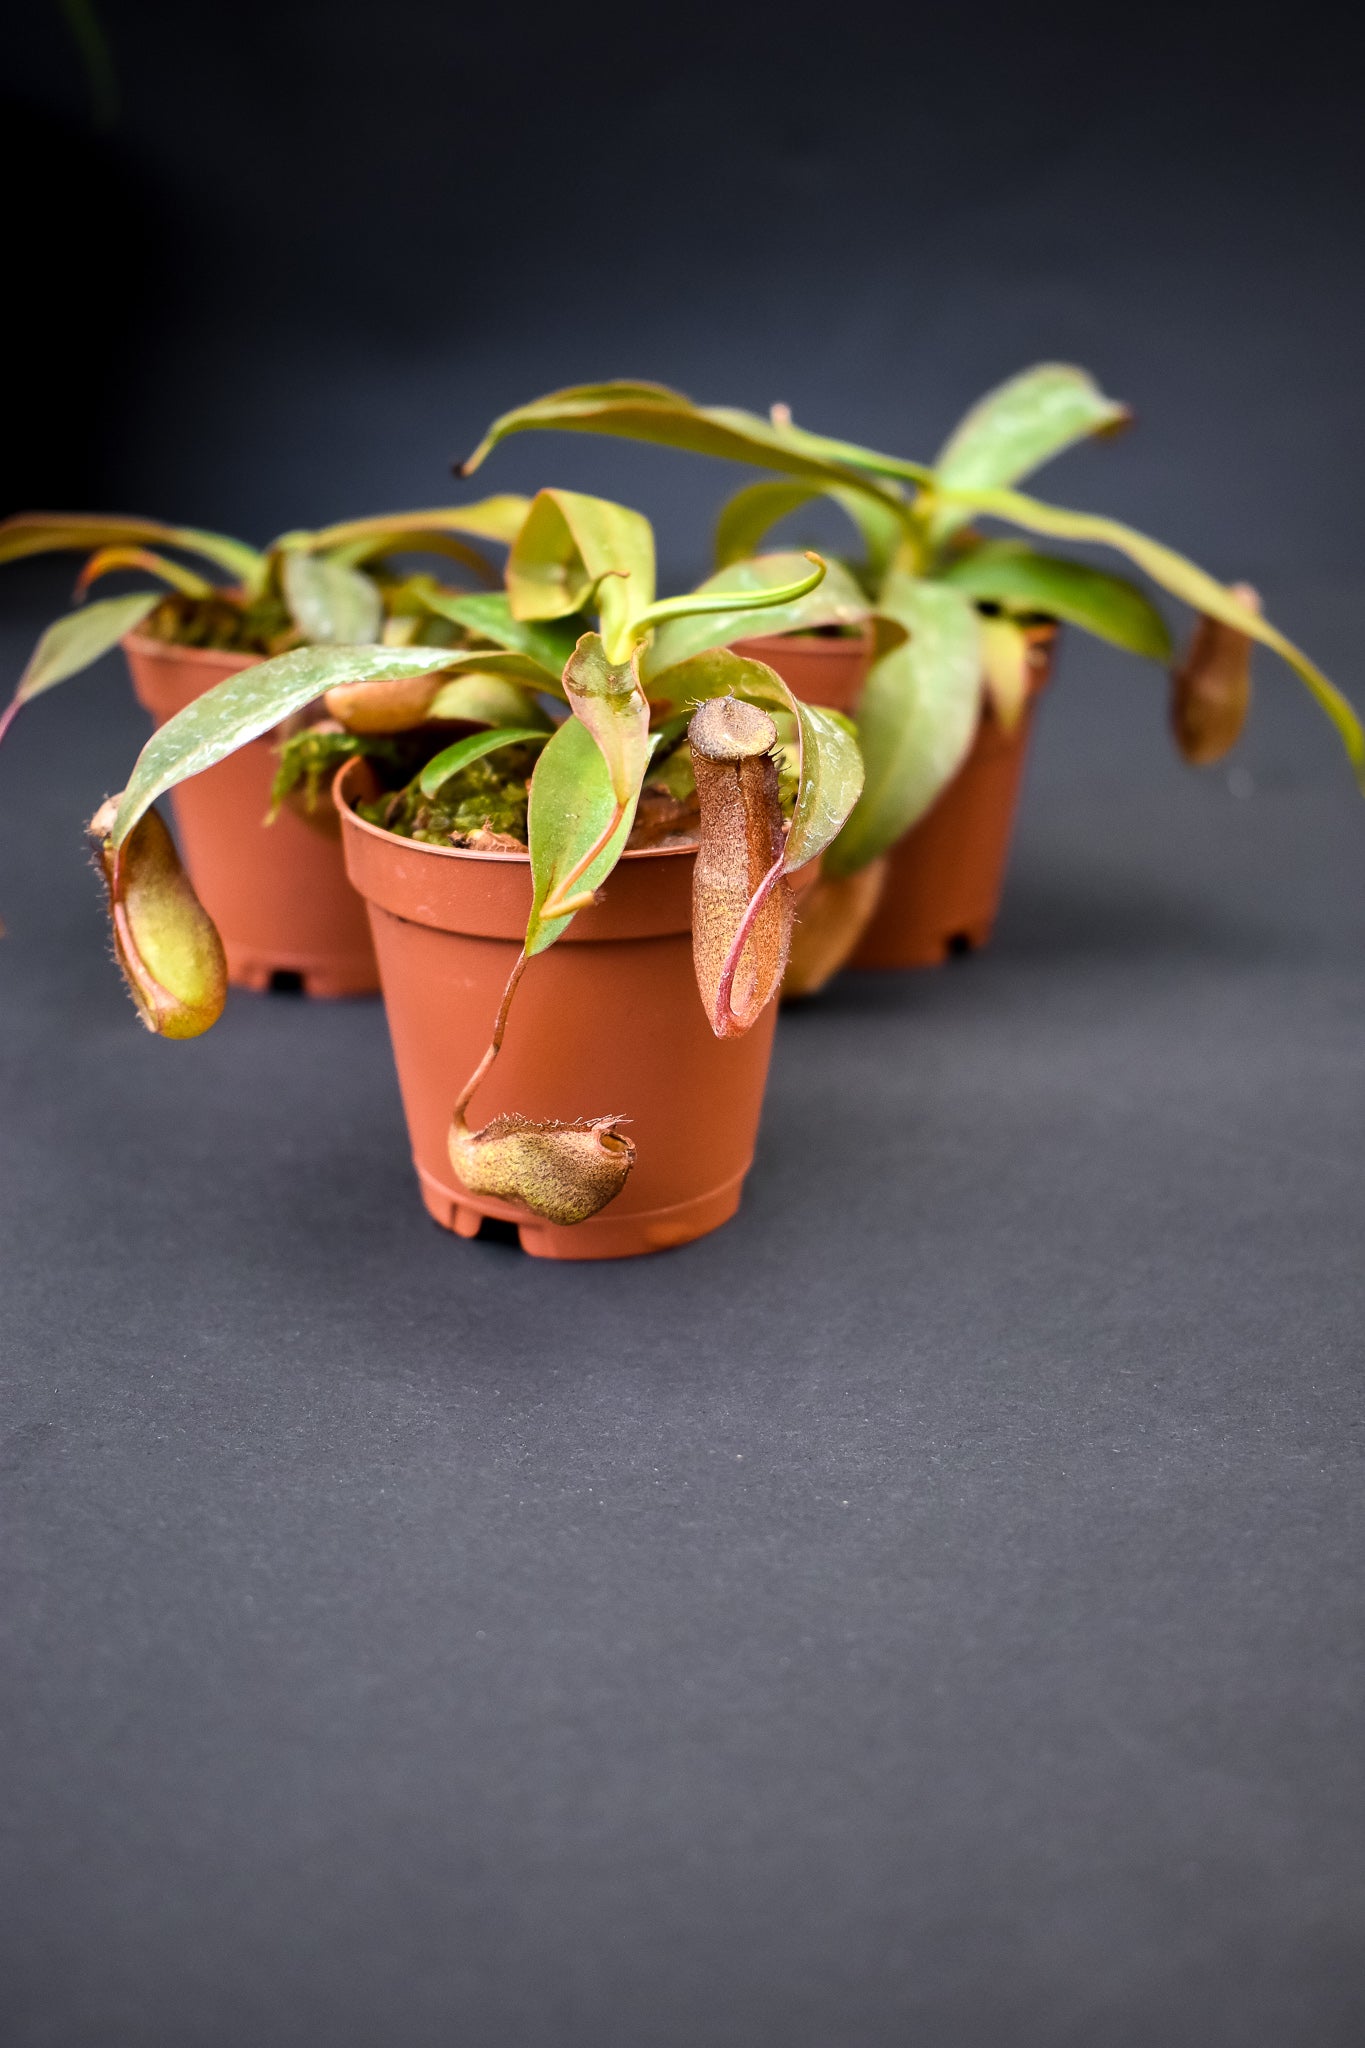 Mini plant box - " Thirsty Thursday" Pitcher Plants, Nepenthes Rebecca (3 plants) - Belle's Greenhouse